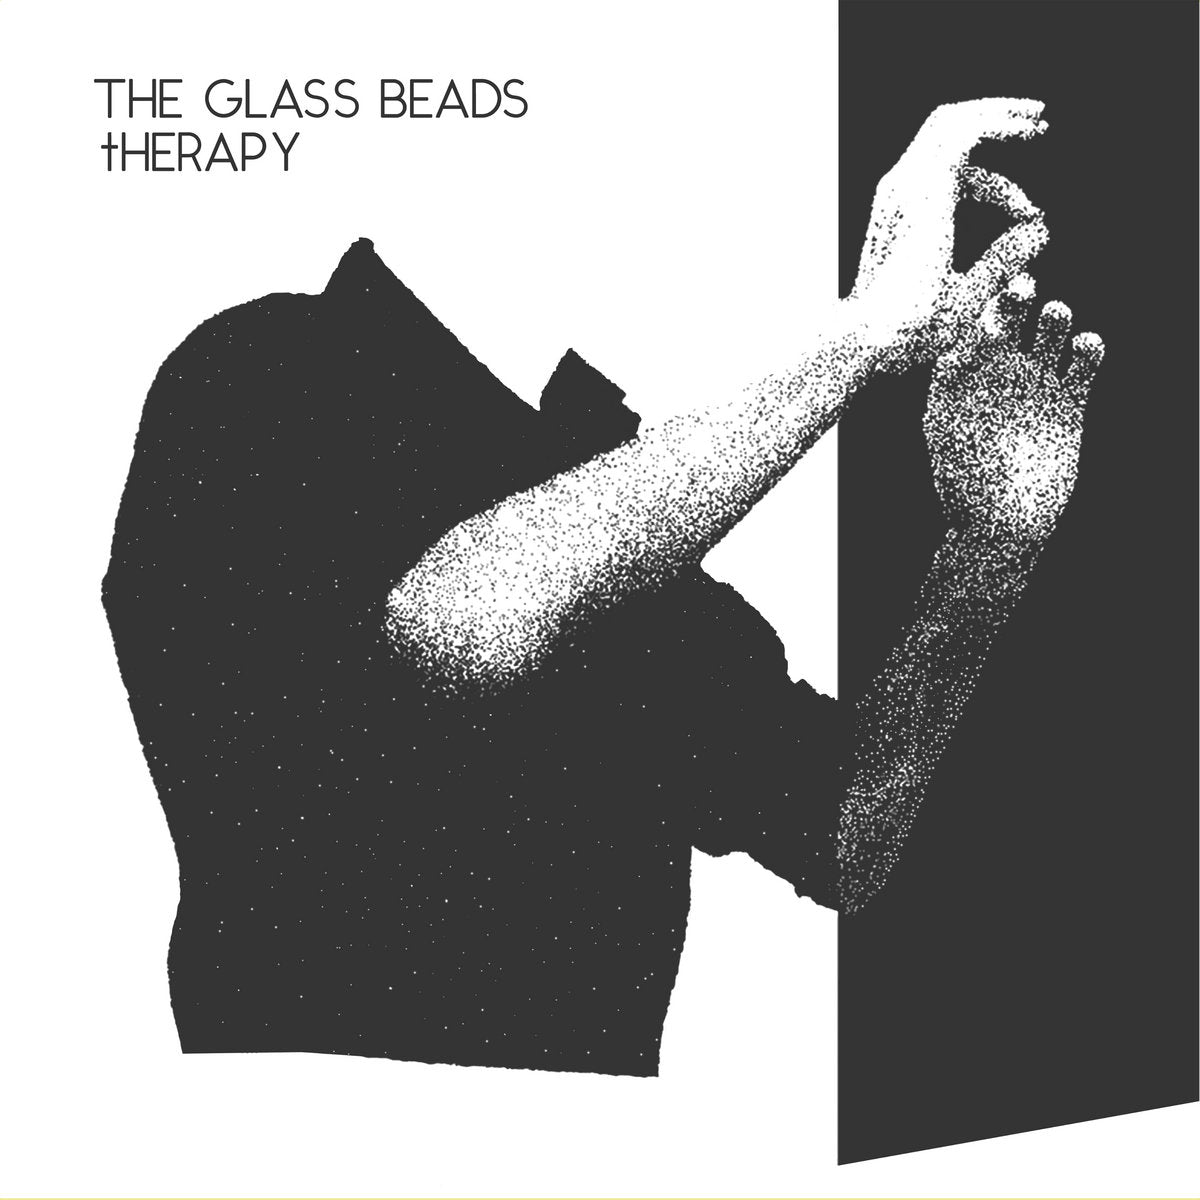 THE GLASS BEADS - THERAPY Vinyl LP